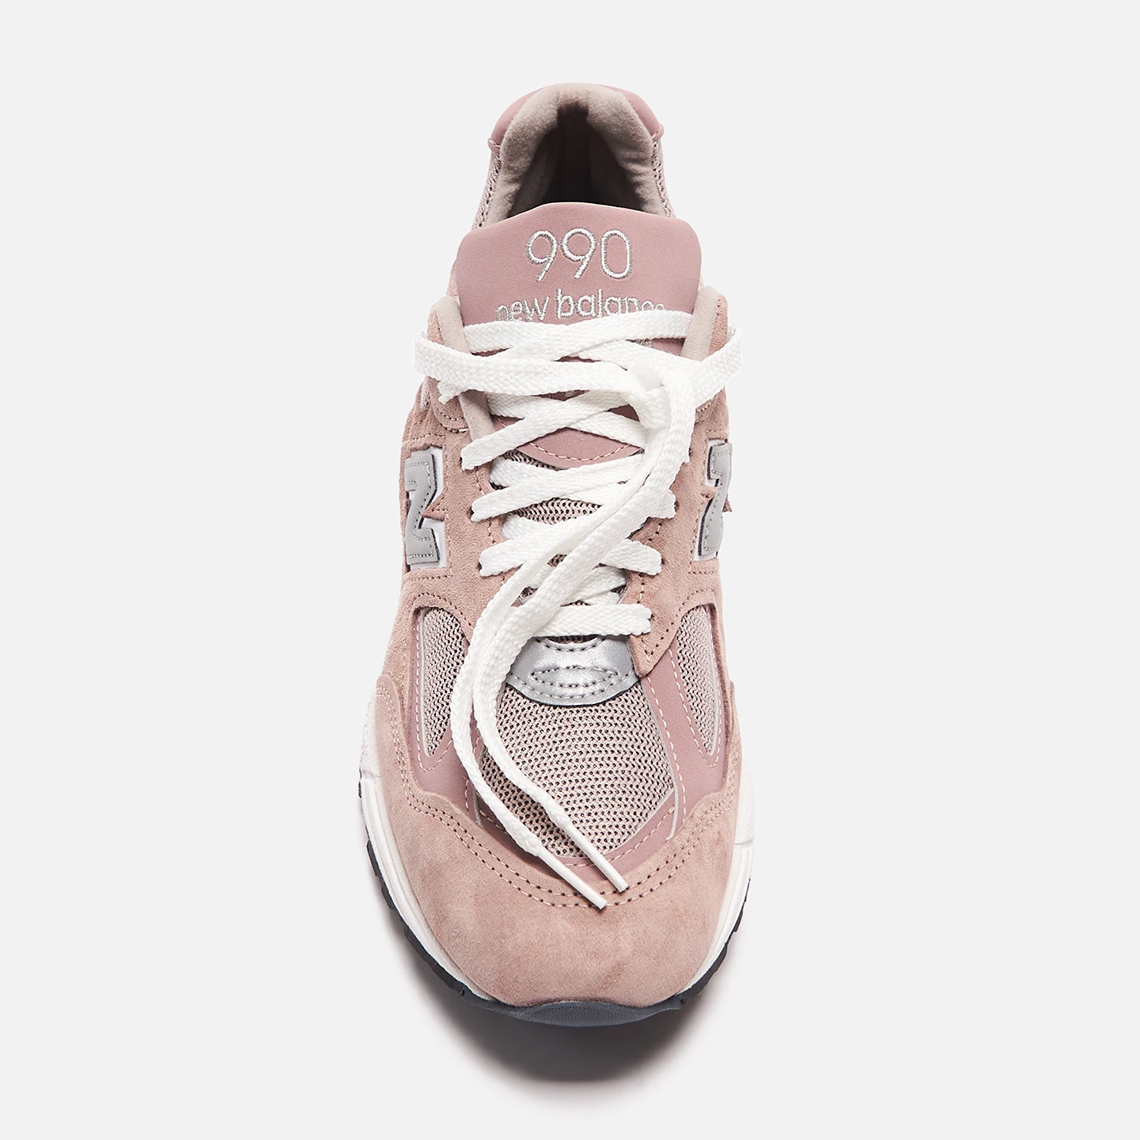 KITH’s New Balance 990v2 In Dusty Pink Is Completely Sold Out